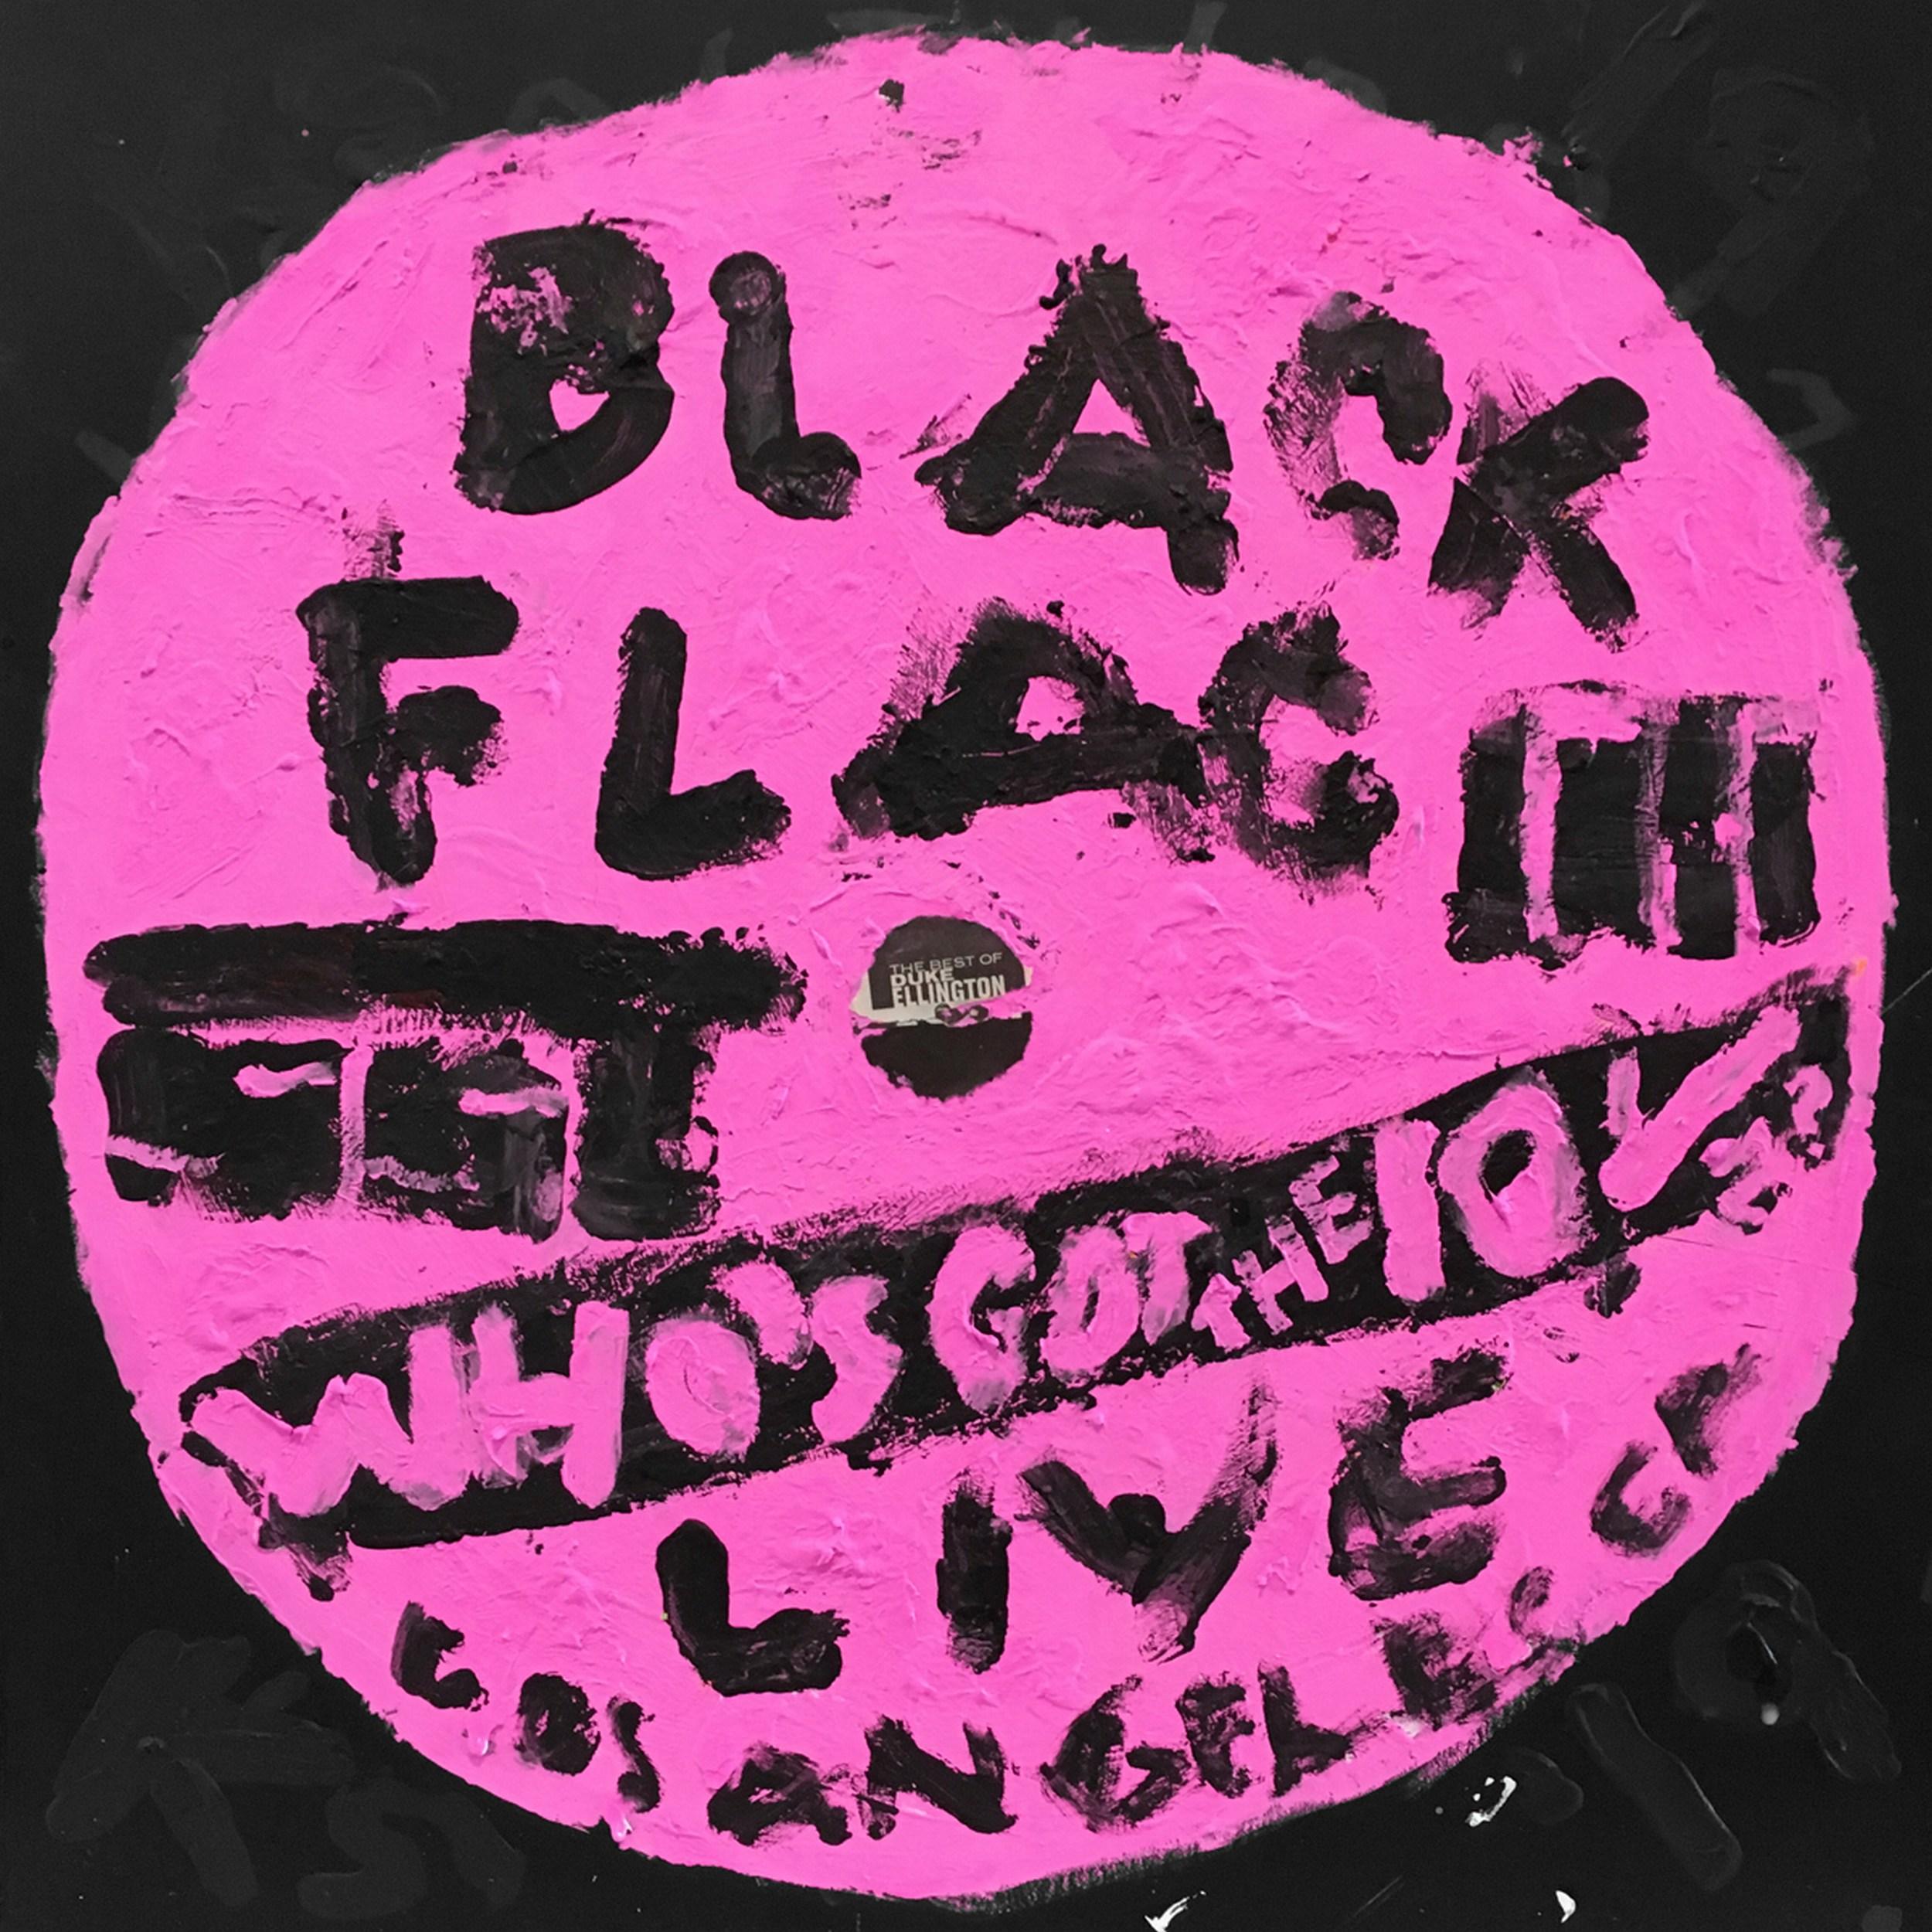 Black Flag - Who’s Got The 10 1/2? (Grammy, Album Art, Iconic, Rock and Roll)